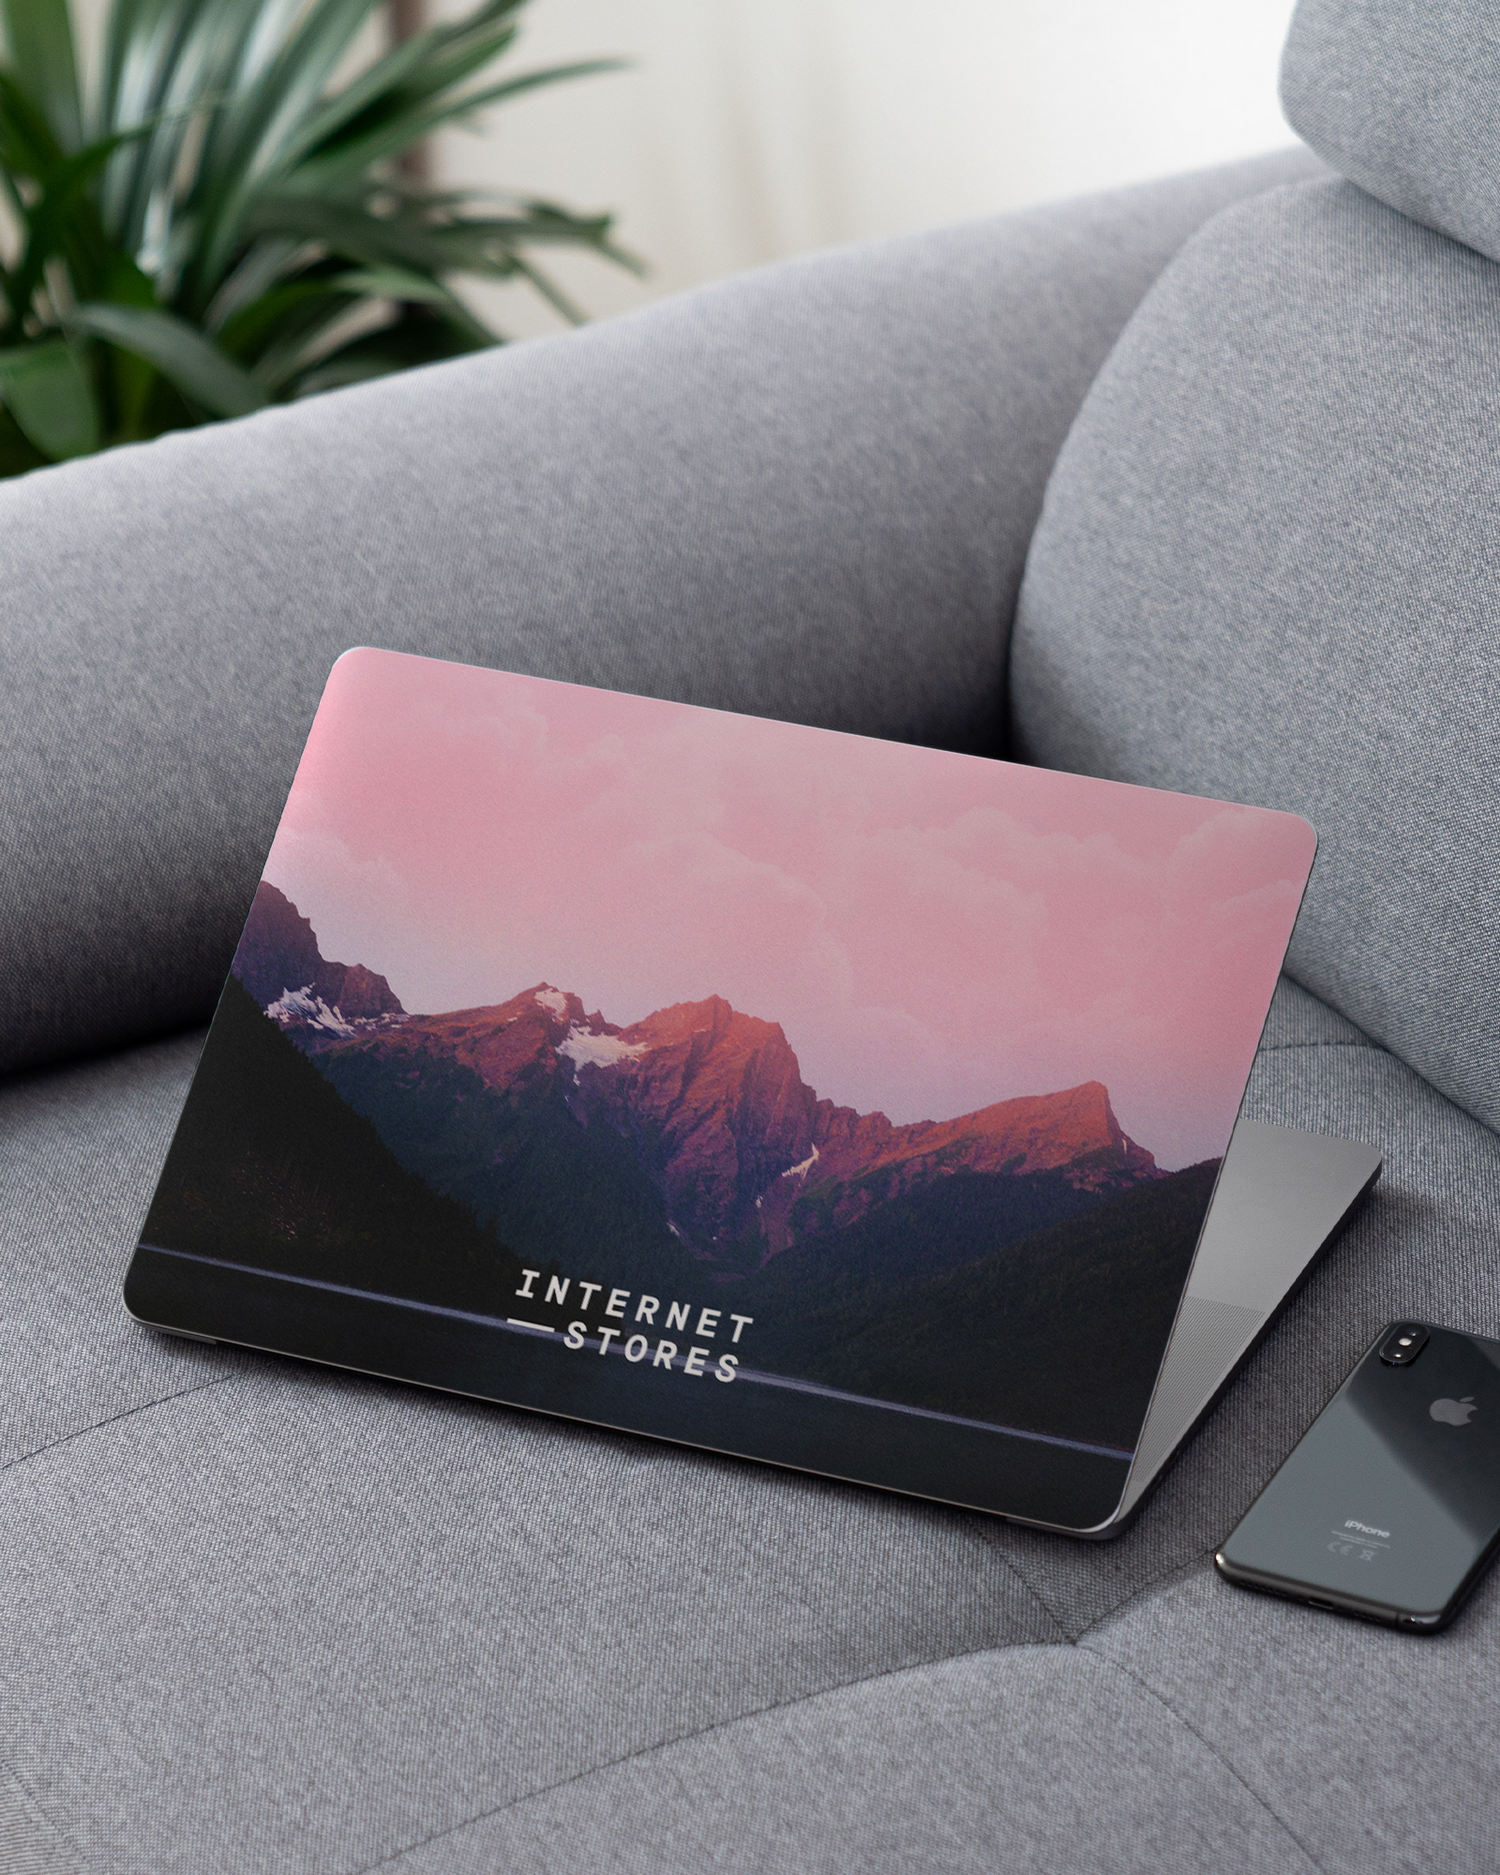 Lake Laptop Skin for 13 inch Apple MacBooks on a couch